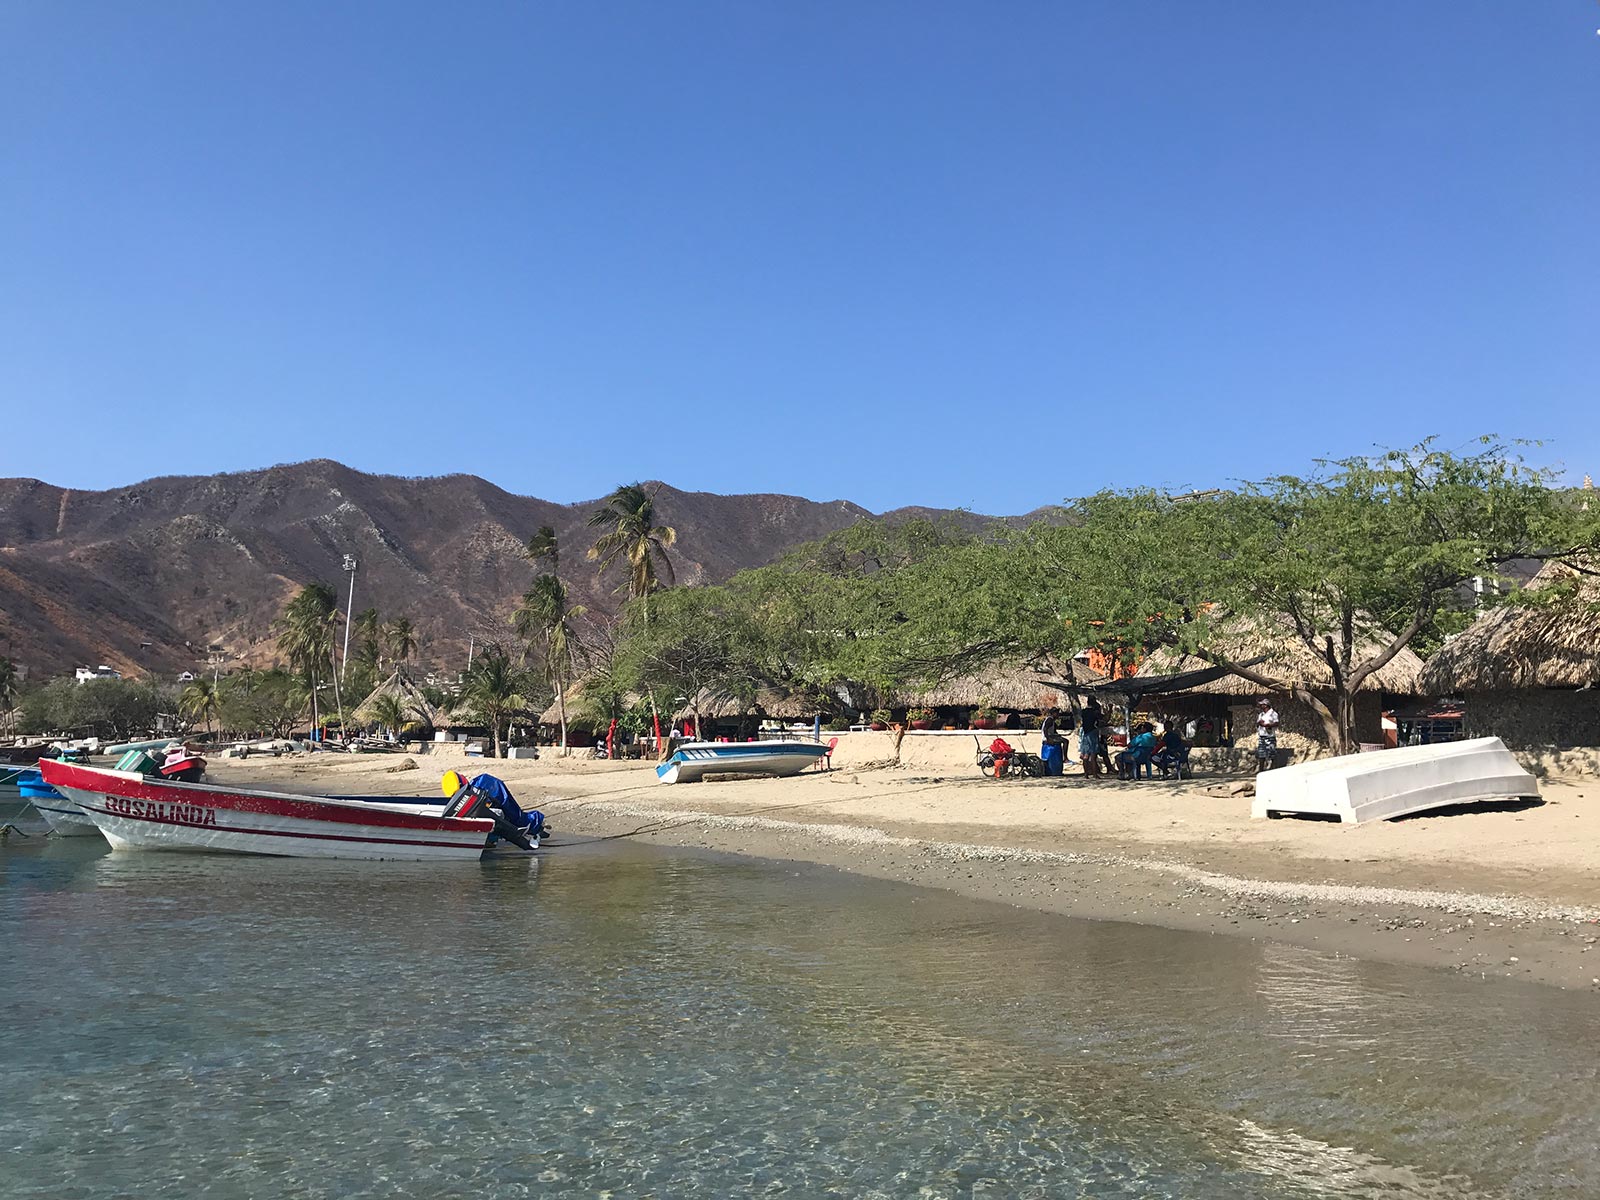 Boats by the beach by the mountain in Santa Marta, Colombia. 4 weeks and Carnival in Colombia